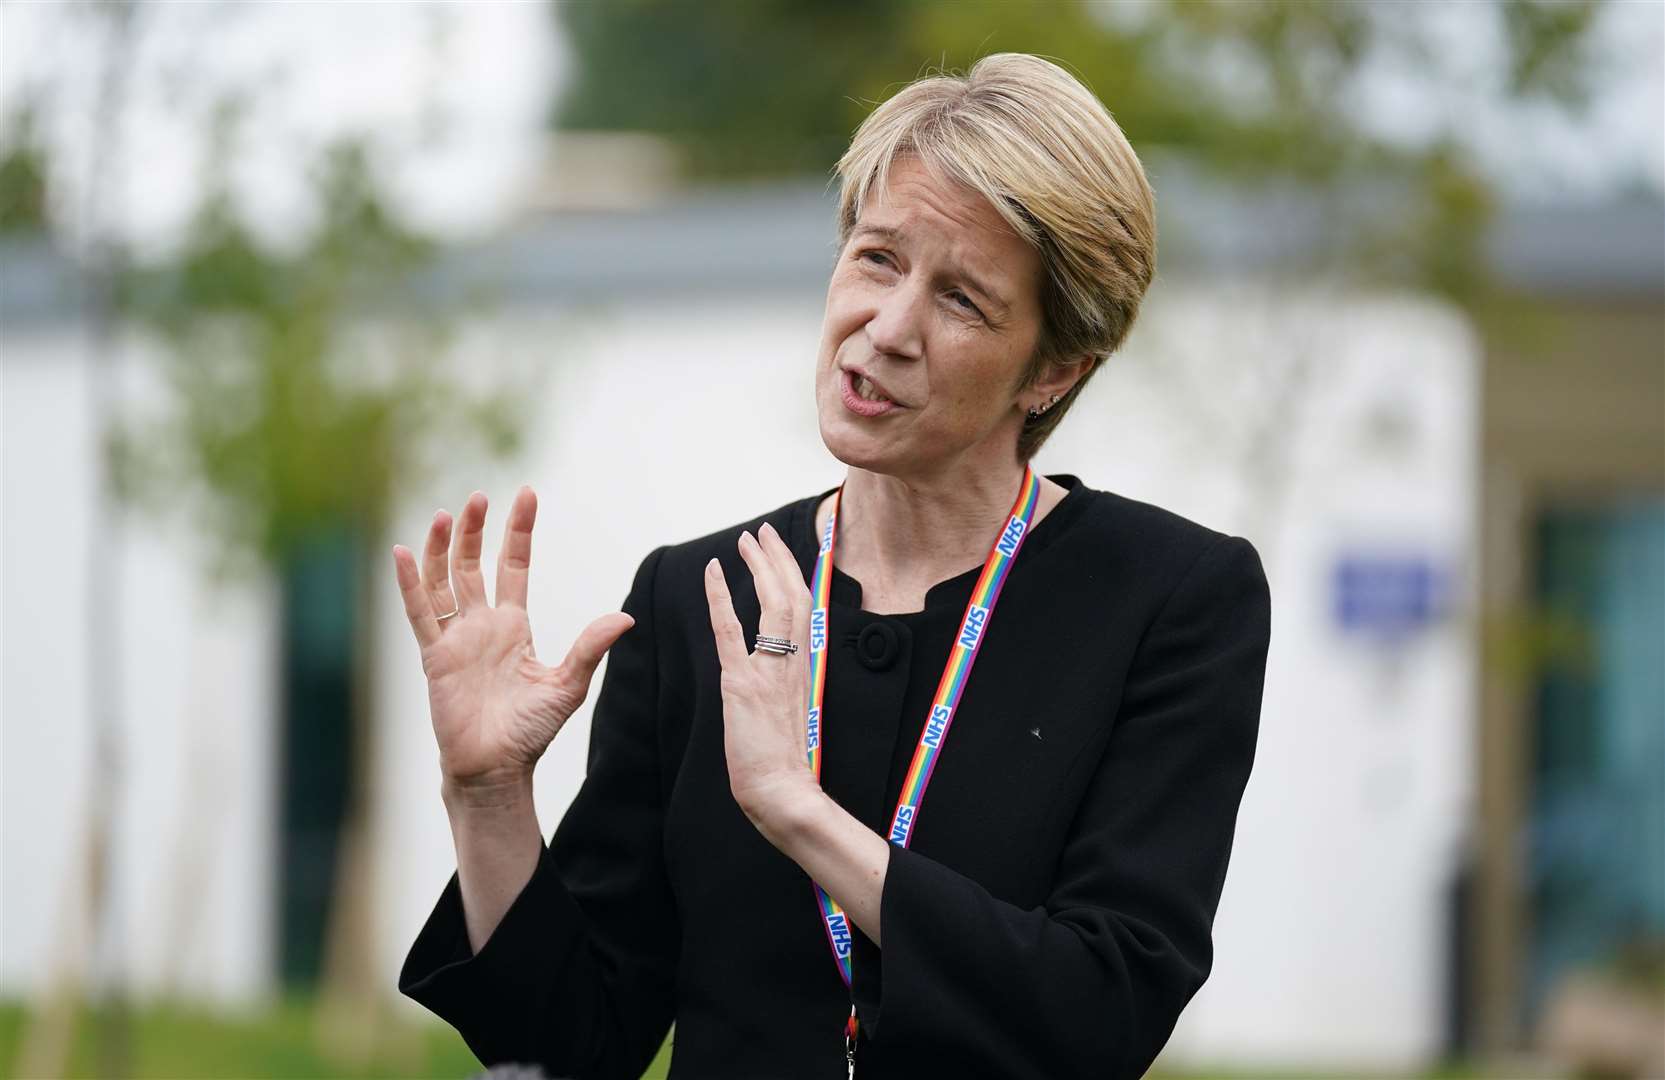 NHS England chief Amanda Pritchard said women should feel they can talk openly about the menopause (Jacob King/PA)